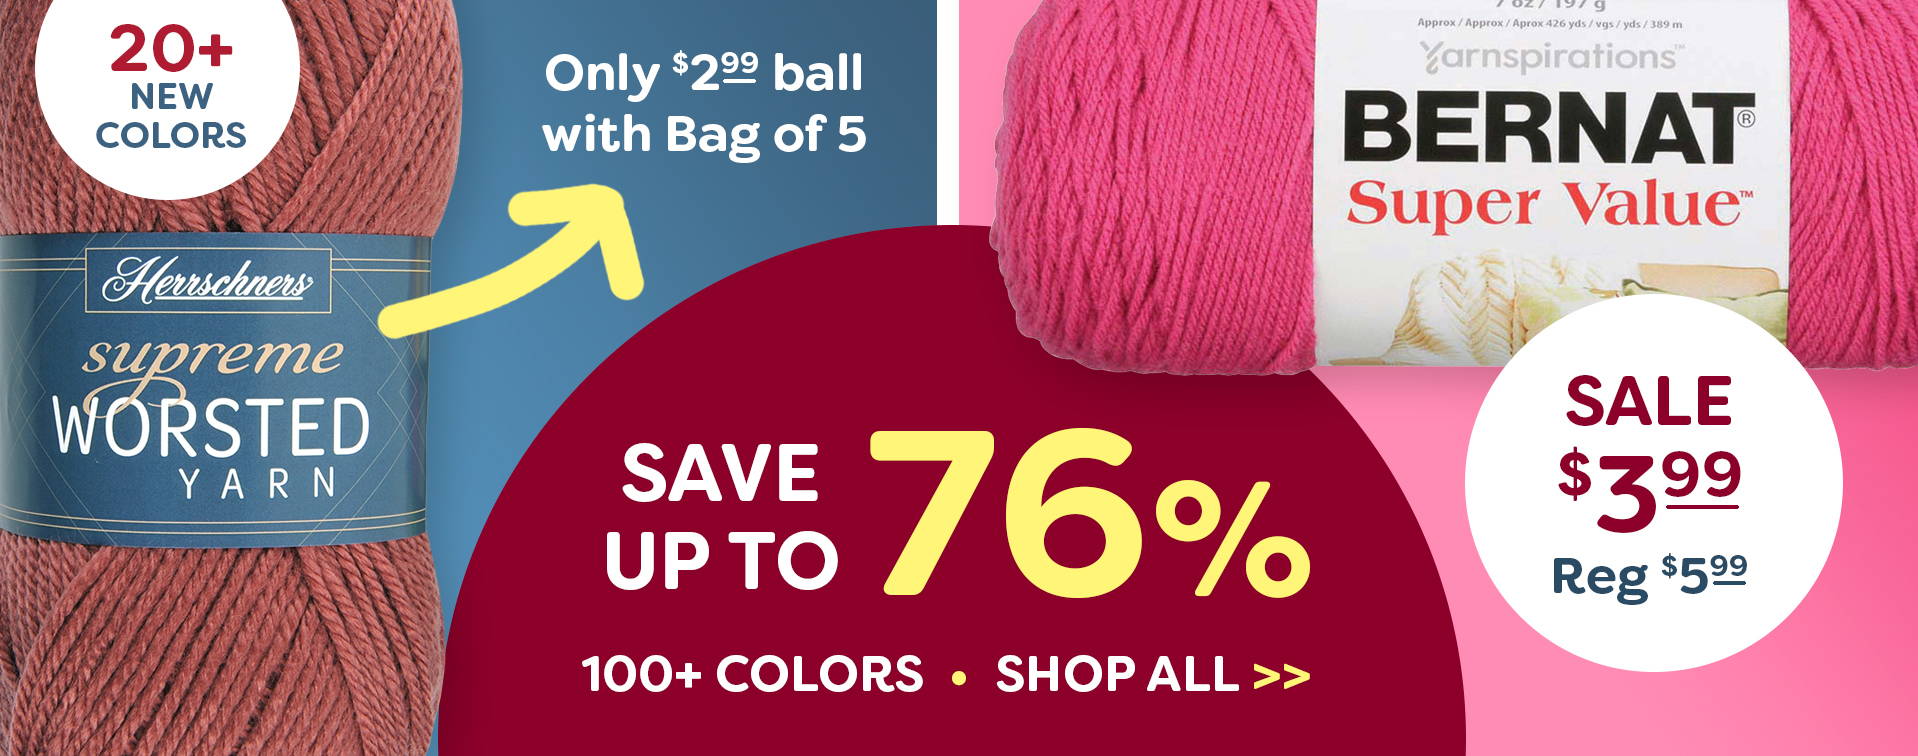 Save up to 76% on Yarn